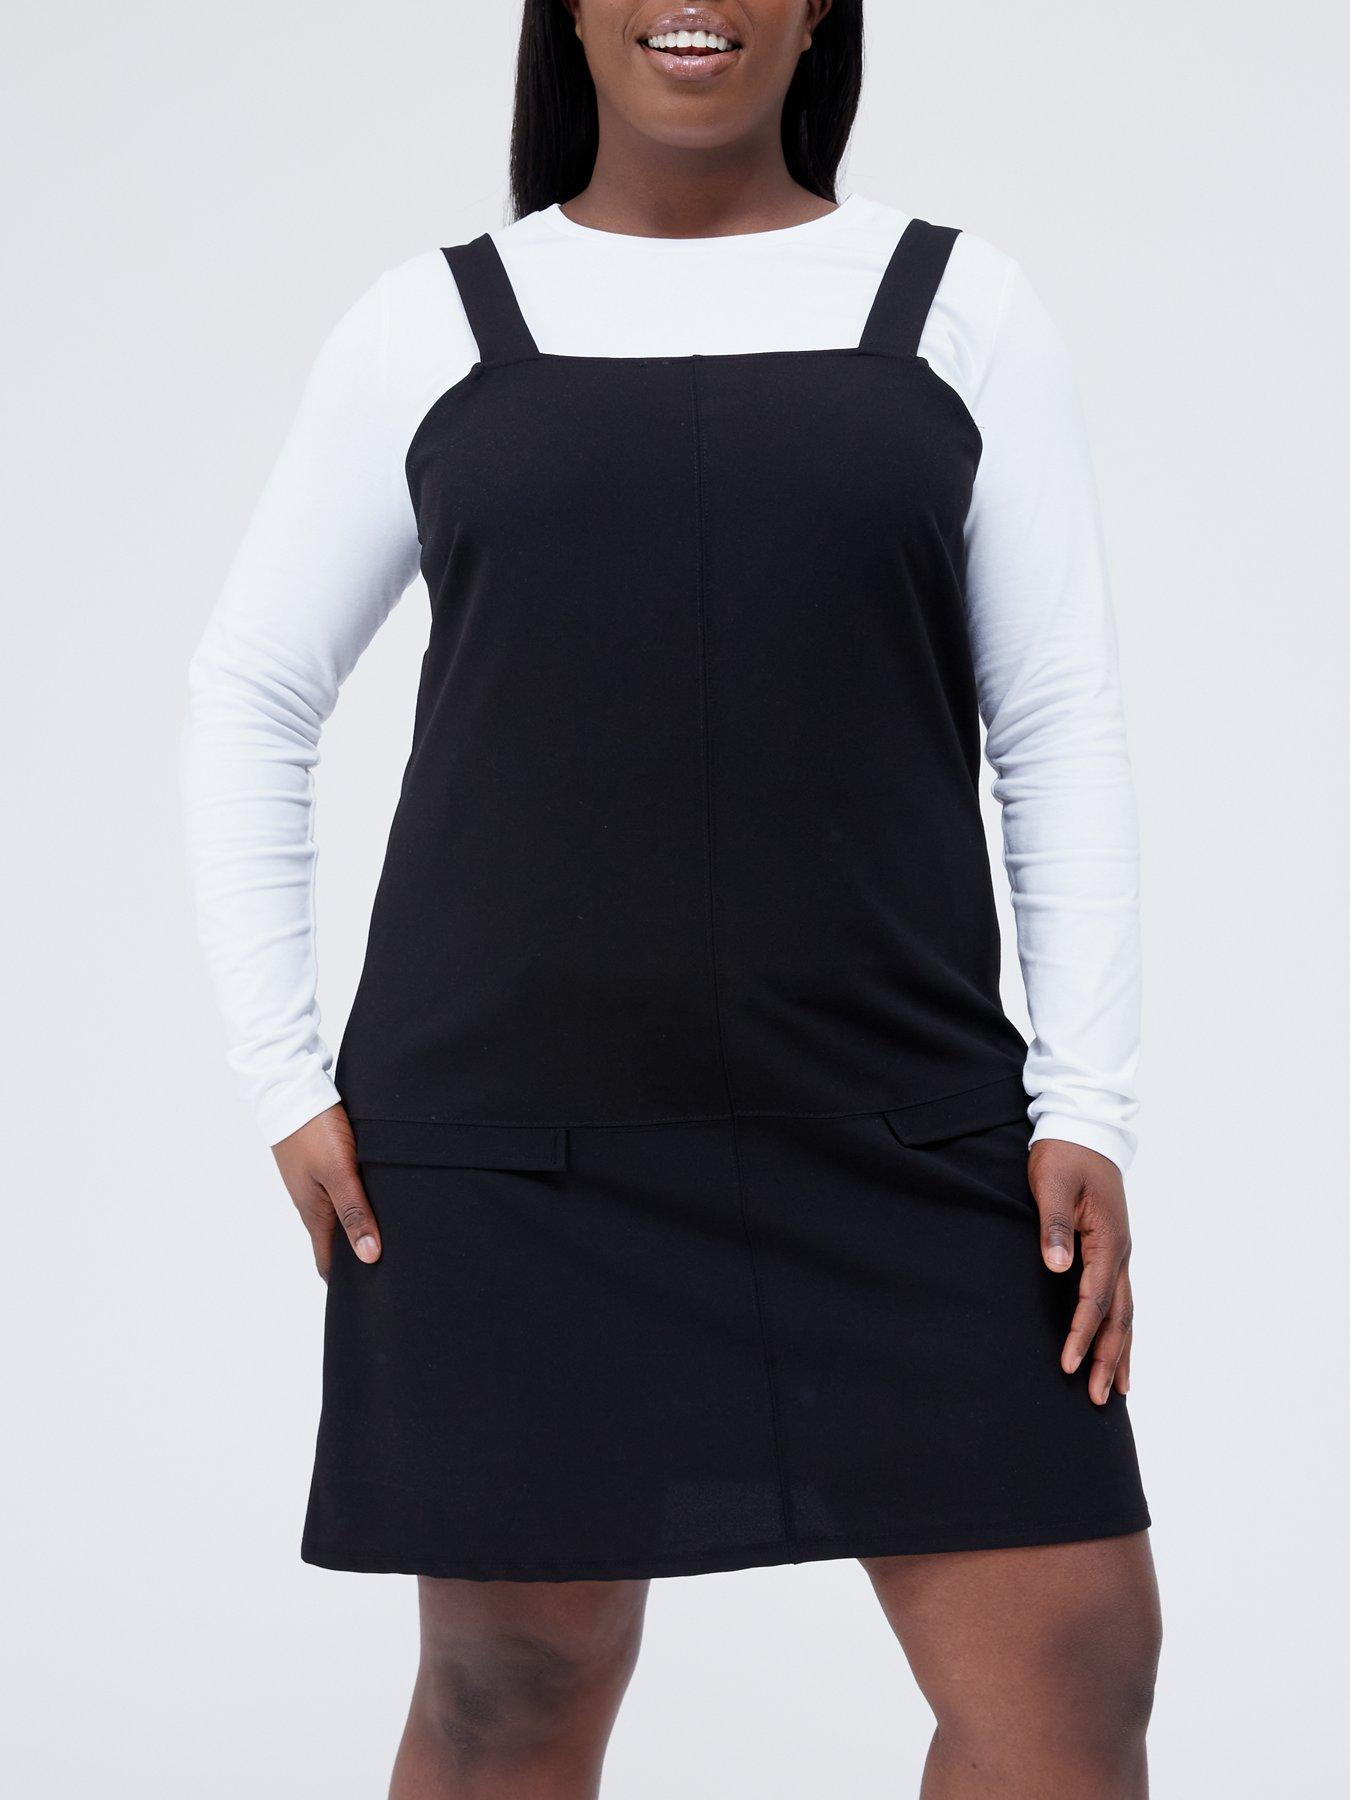 pinafore dresses for adults uk